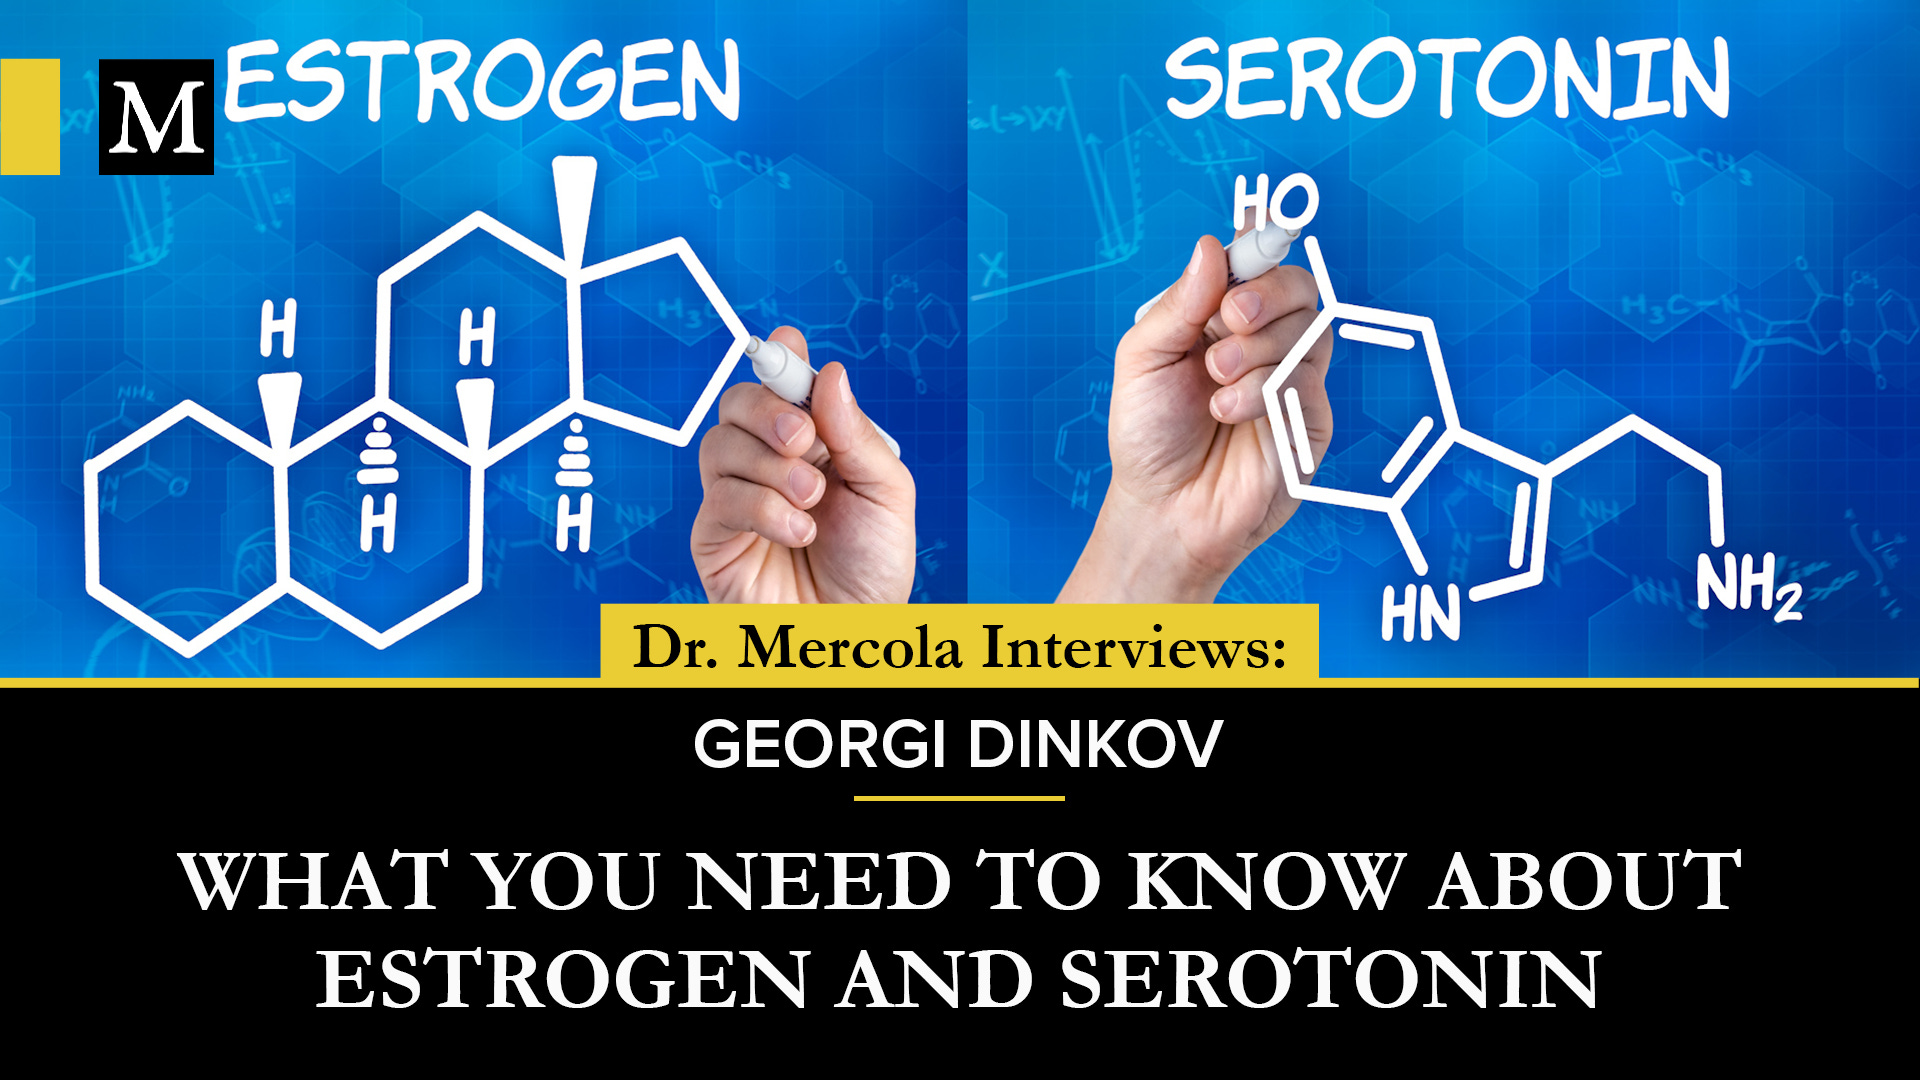 What You Need to Know About Estrogen and Serotonin - Discussion Between Georgi Dinkov & Dr. Mercola